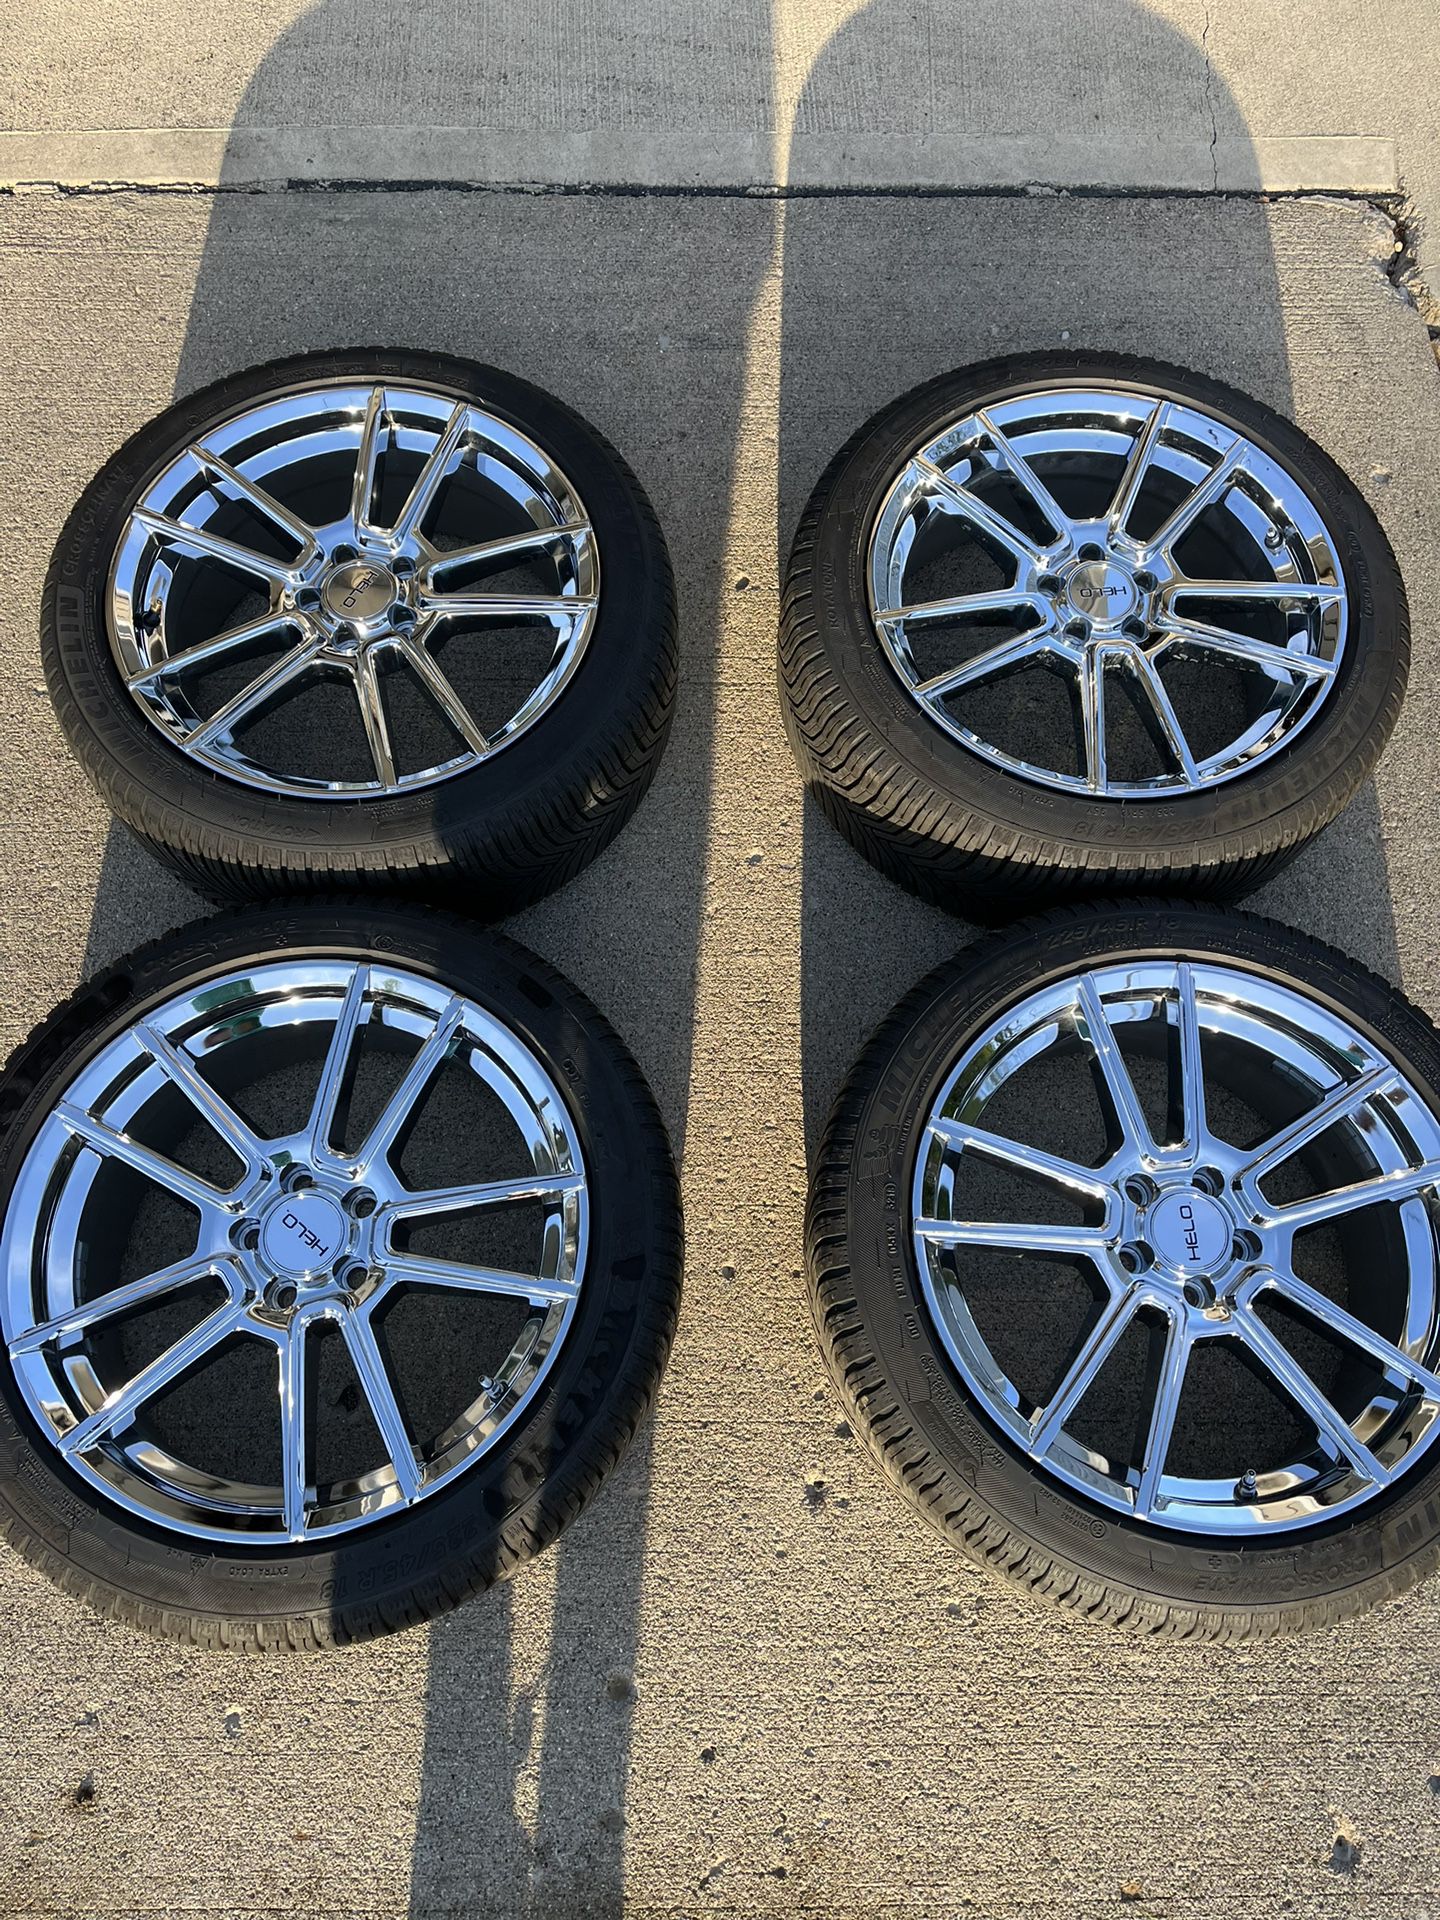 Wheels For Chevy Cruze